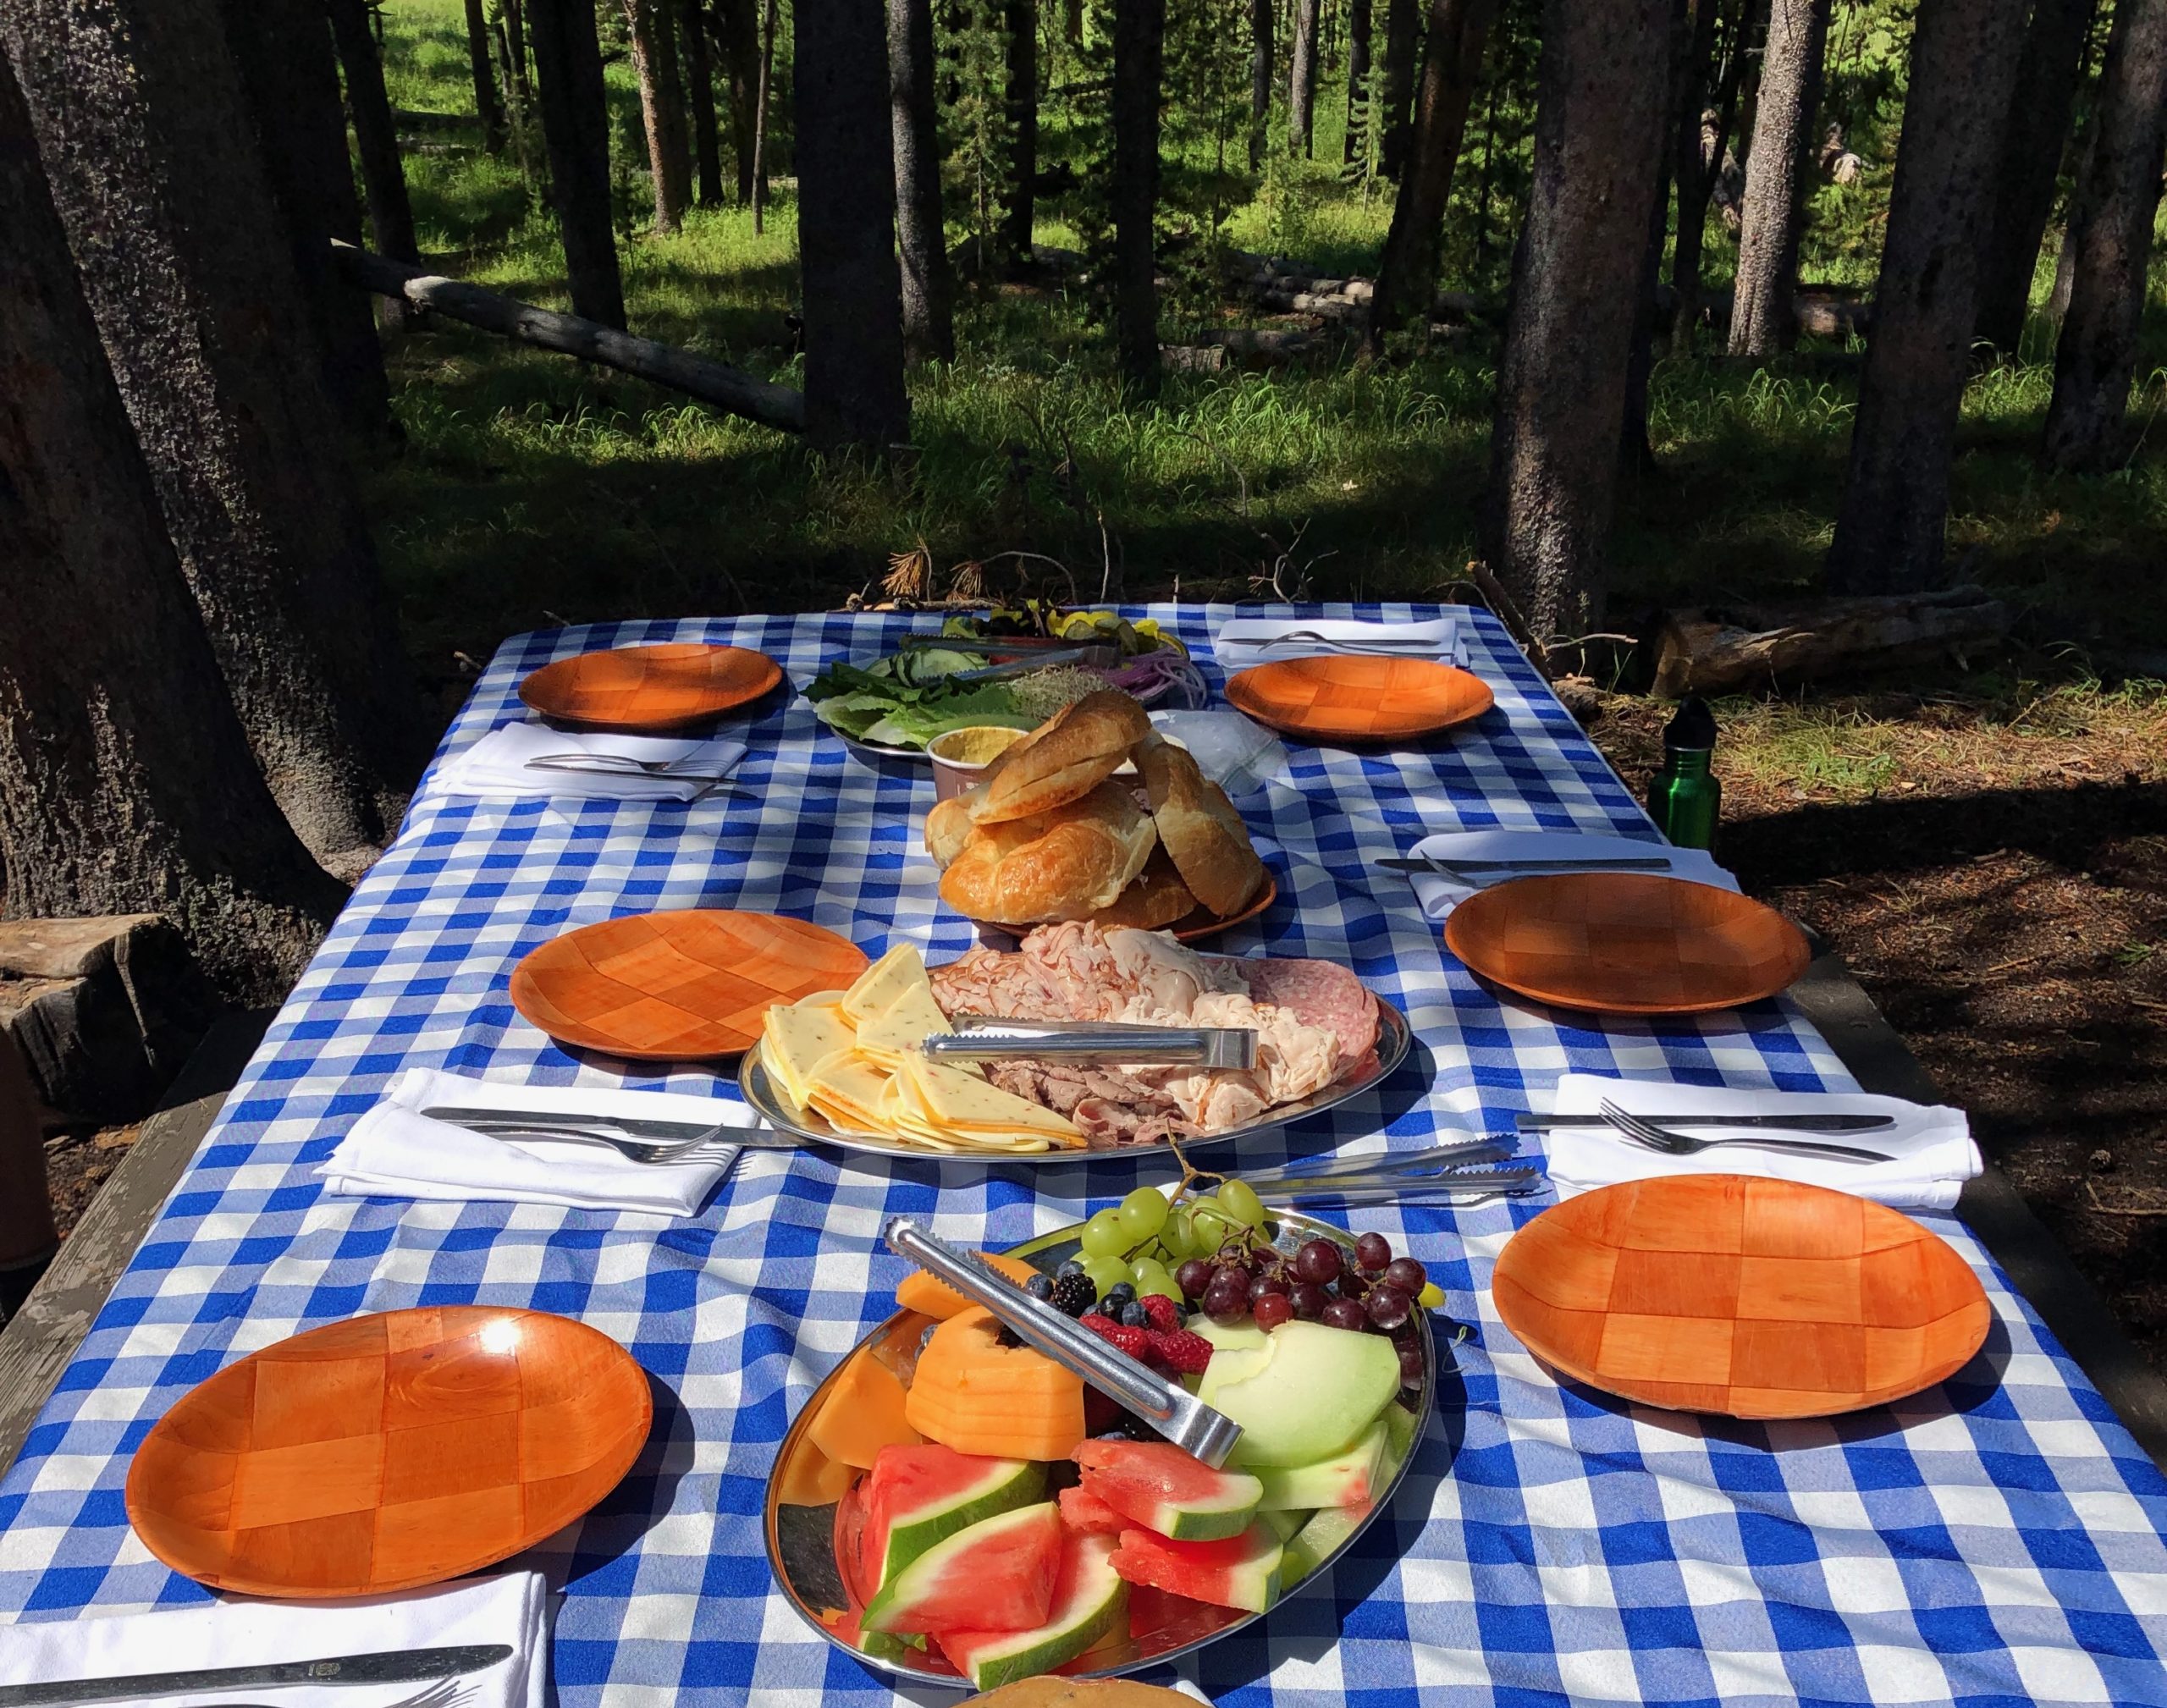 Even a picnic lunch - using reusable tableware and linens - can be convenient and free of disposables.